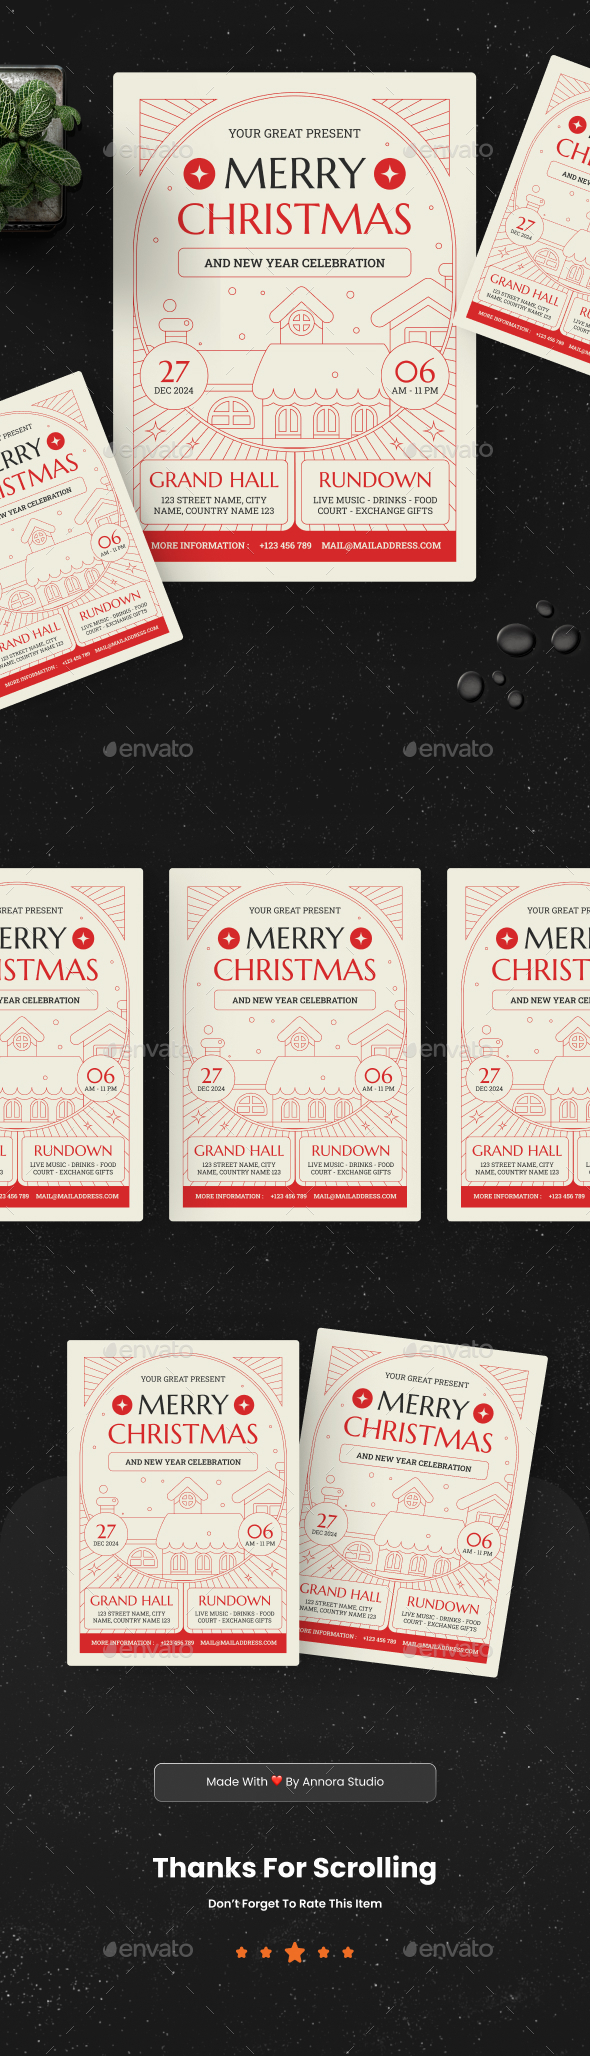 [DOWNLOAD]Merry Christmas Flyer